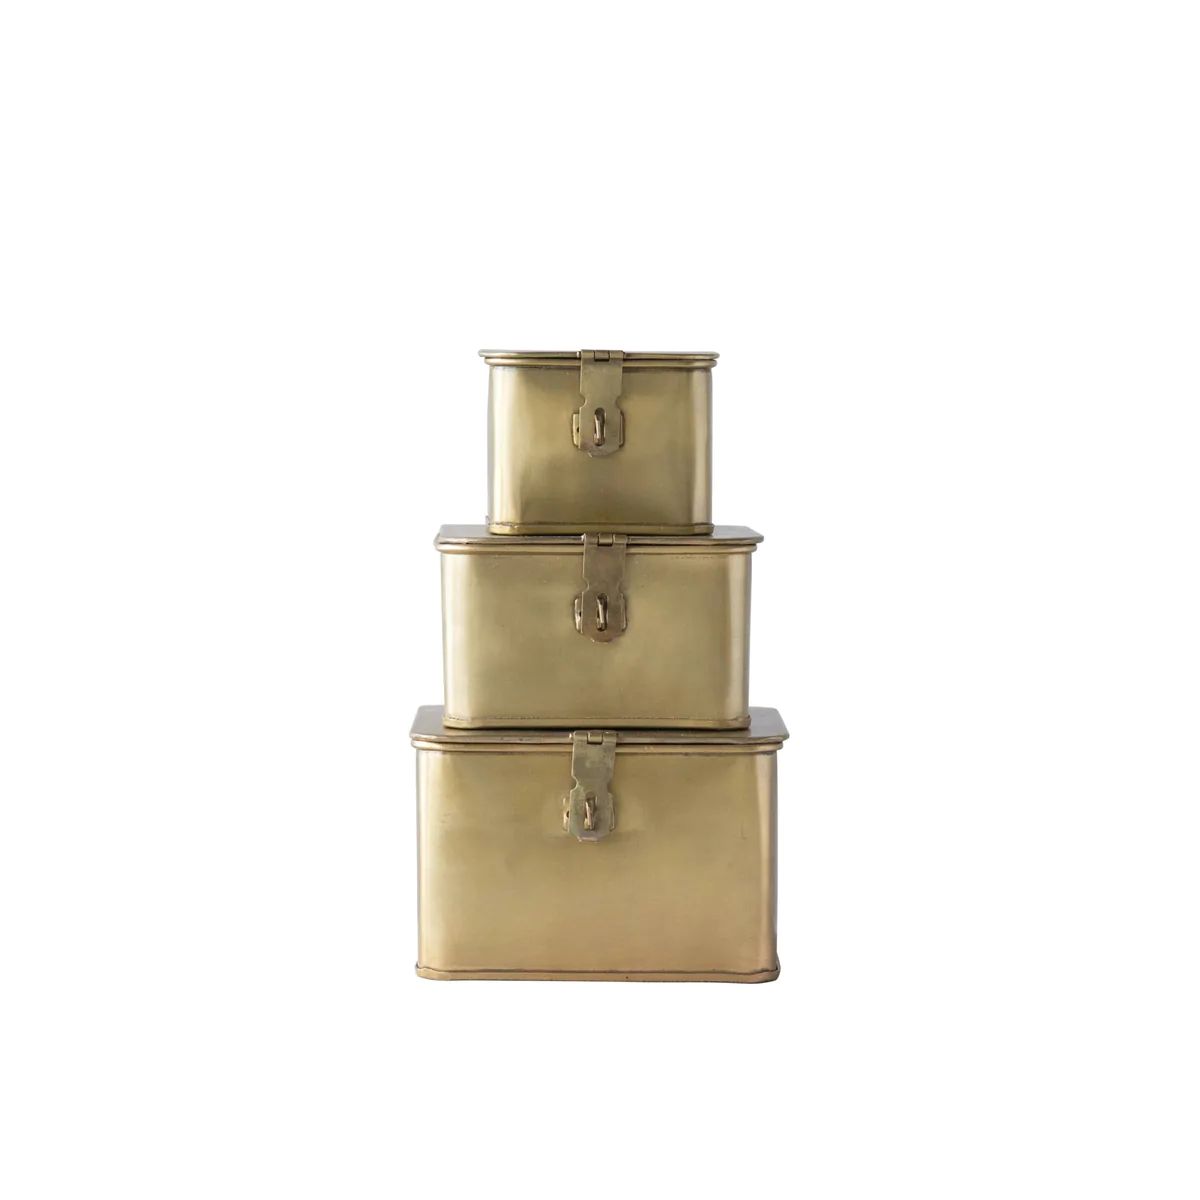 Decorative Brass Latch Boxes, Set of 3 | APIARY by The Busy Bee